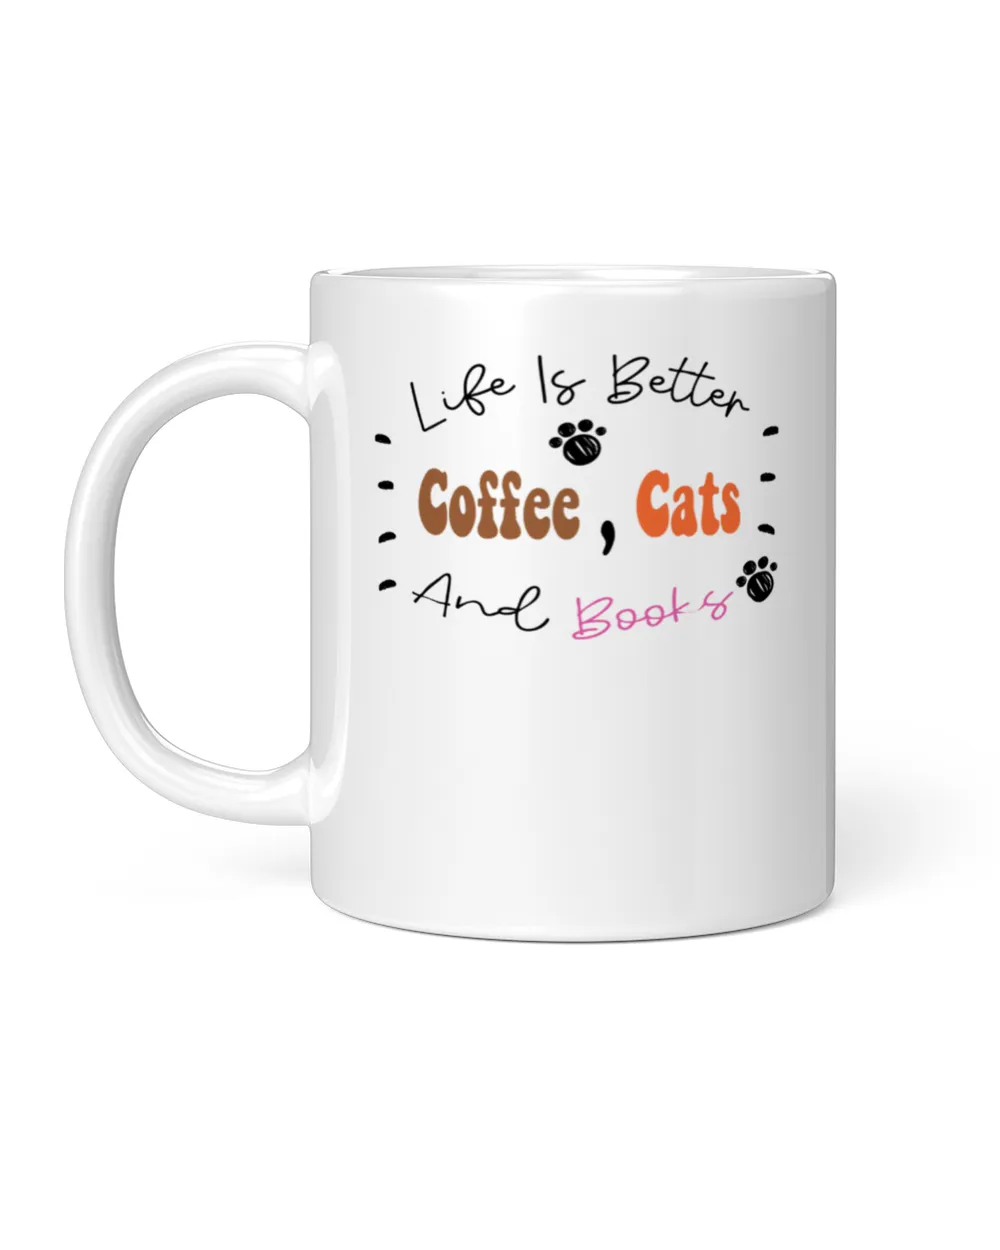 Life Is Better With Coffee Cats And Books  Cat Coffee  Cats And Books  Cat Lover  Cat Mom  Cute Cat 7781 T-Shirt